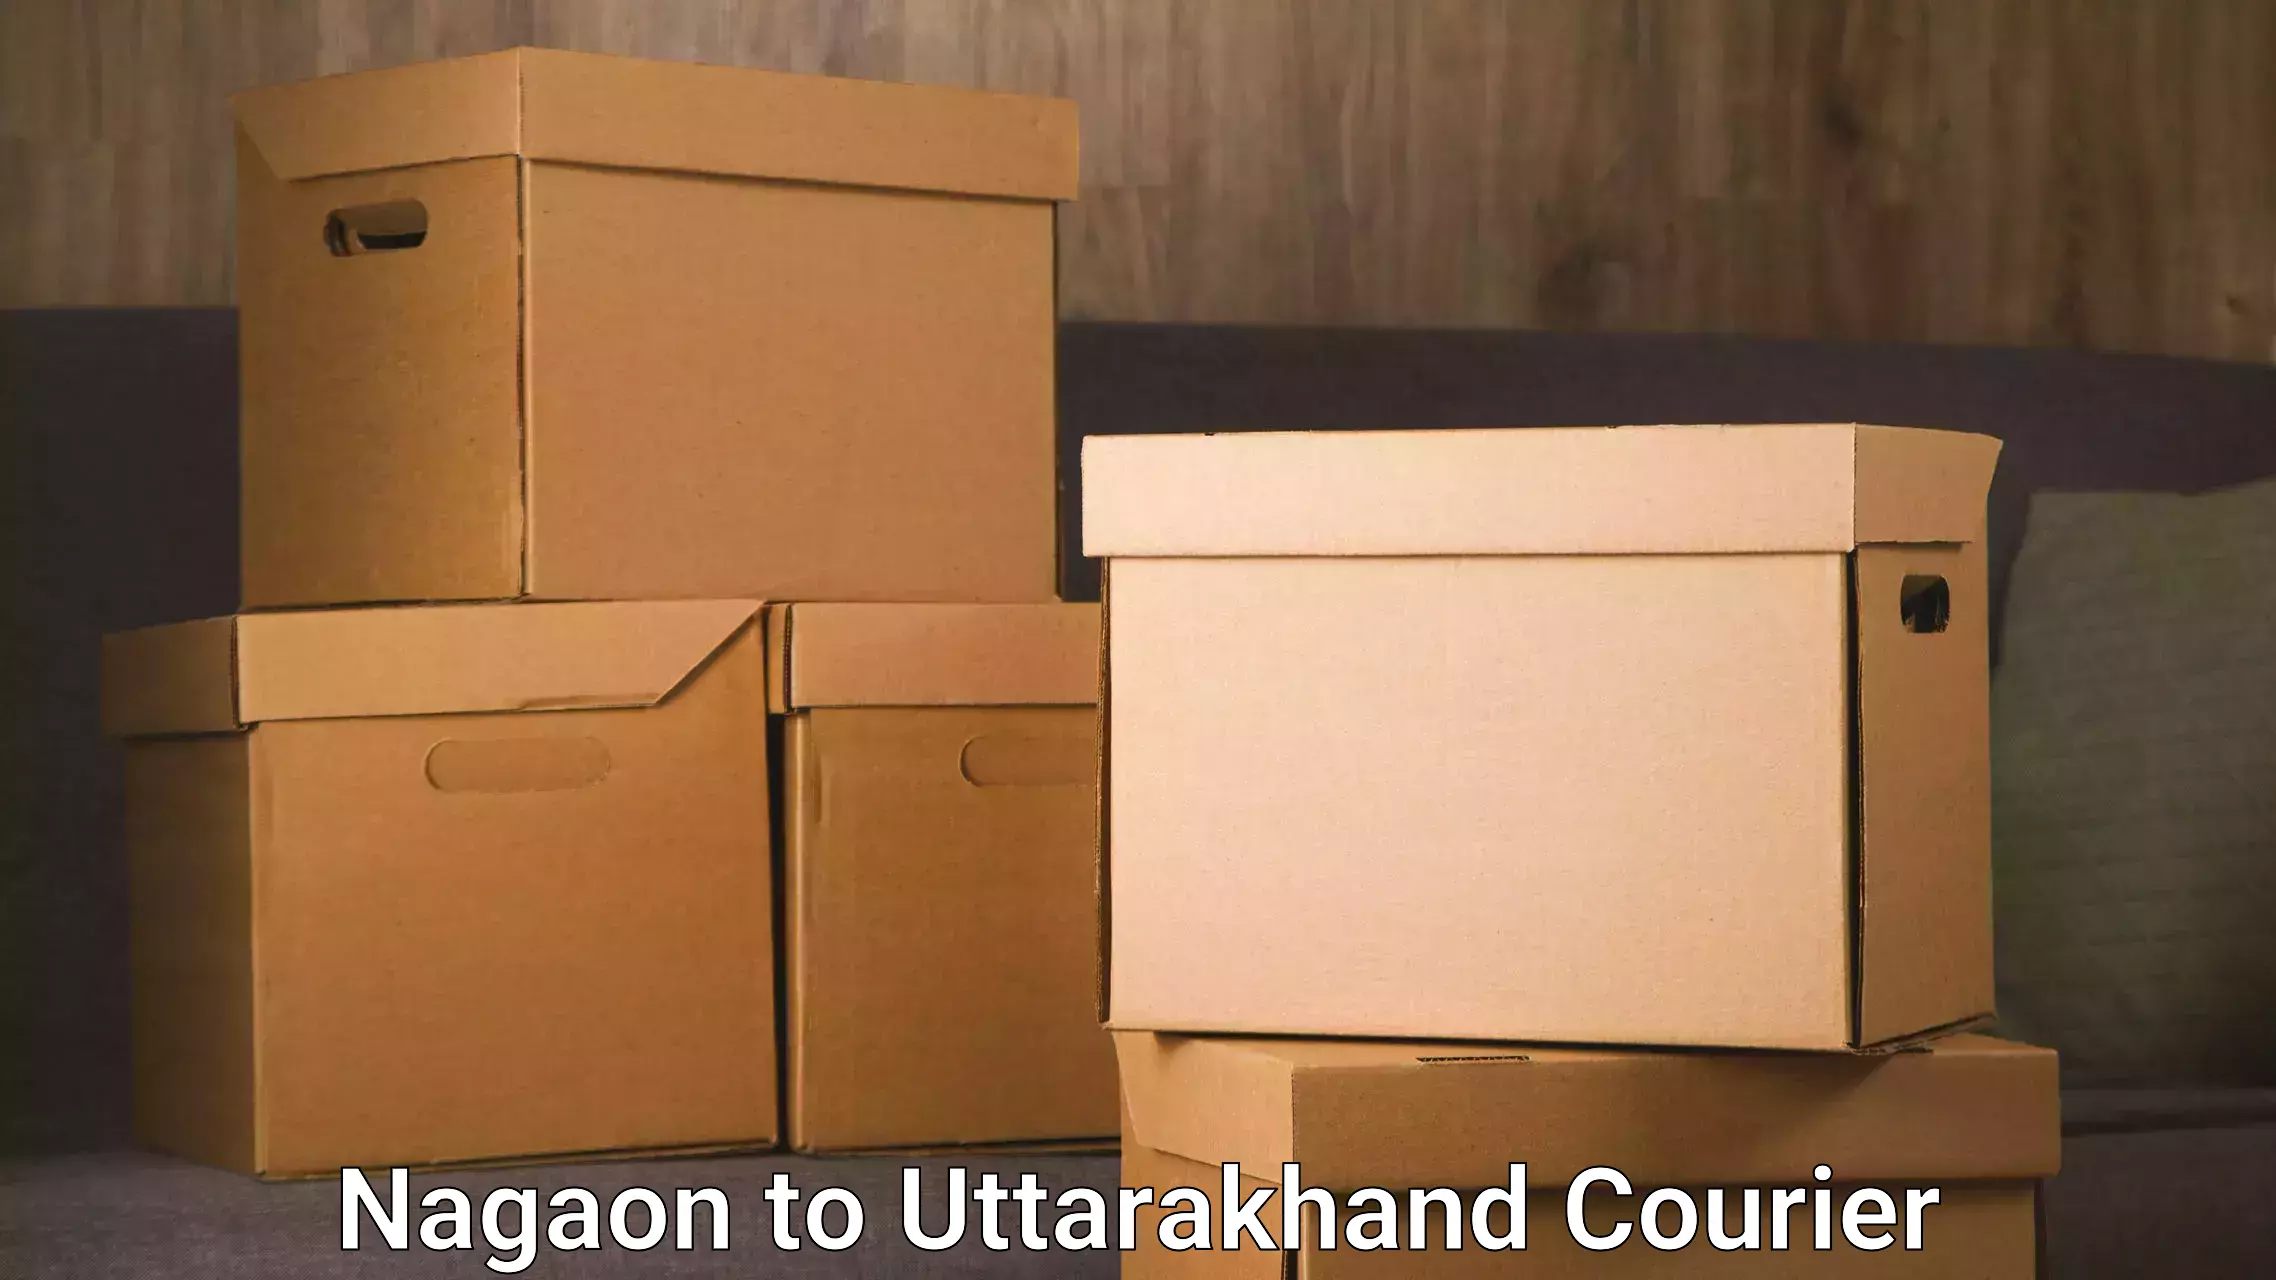 Seamless shipping experience Nagaon to IIT Roorkee